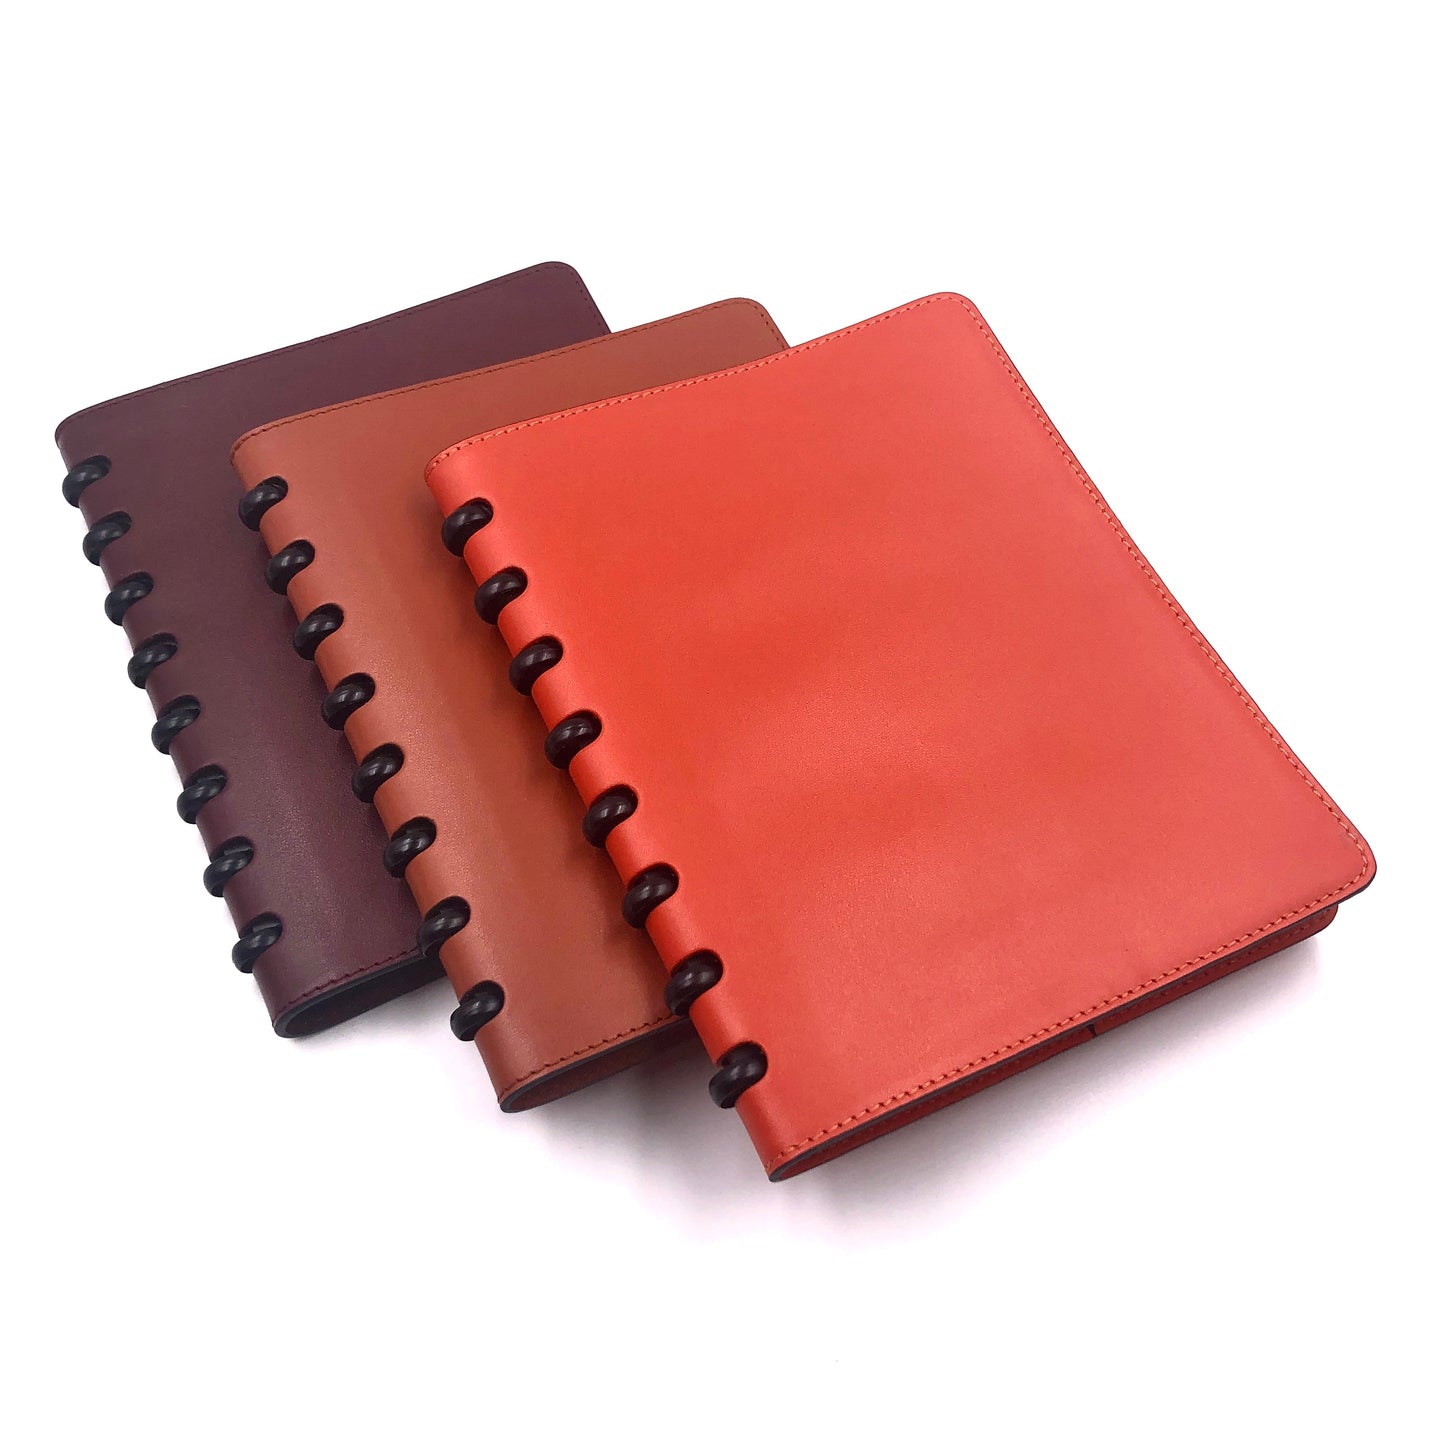 Atoma A4 leather cover